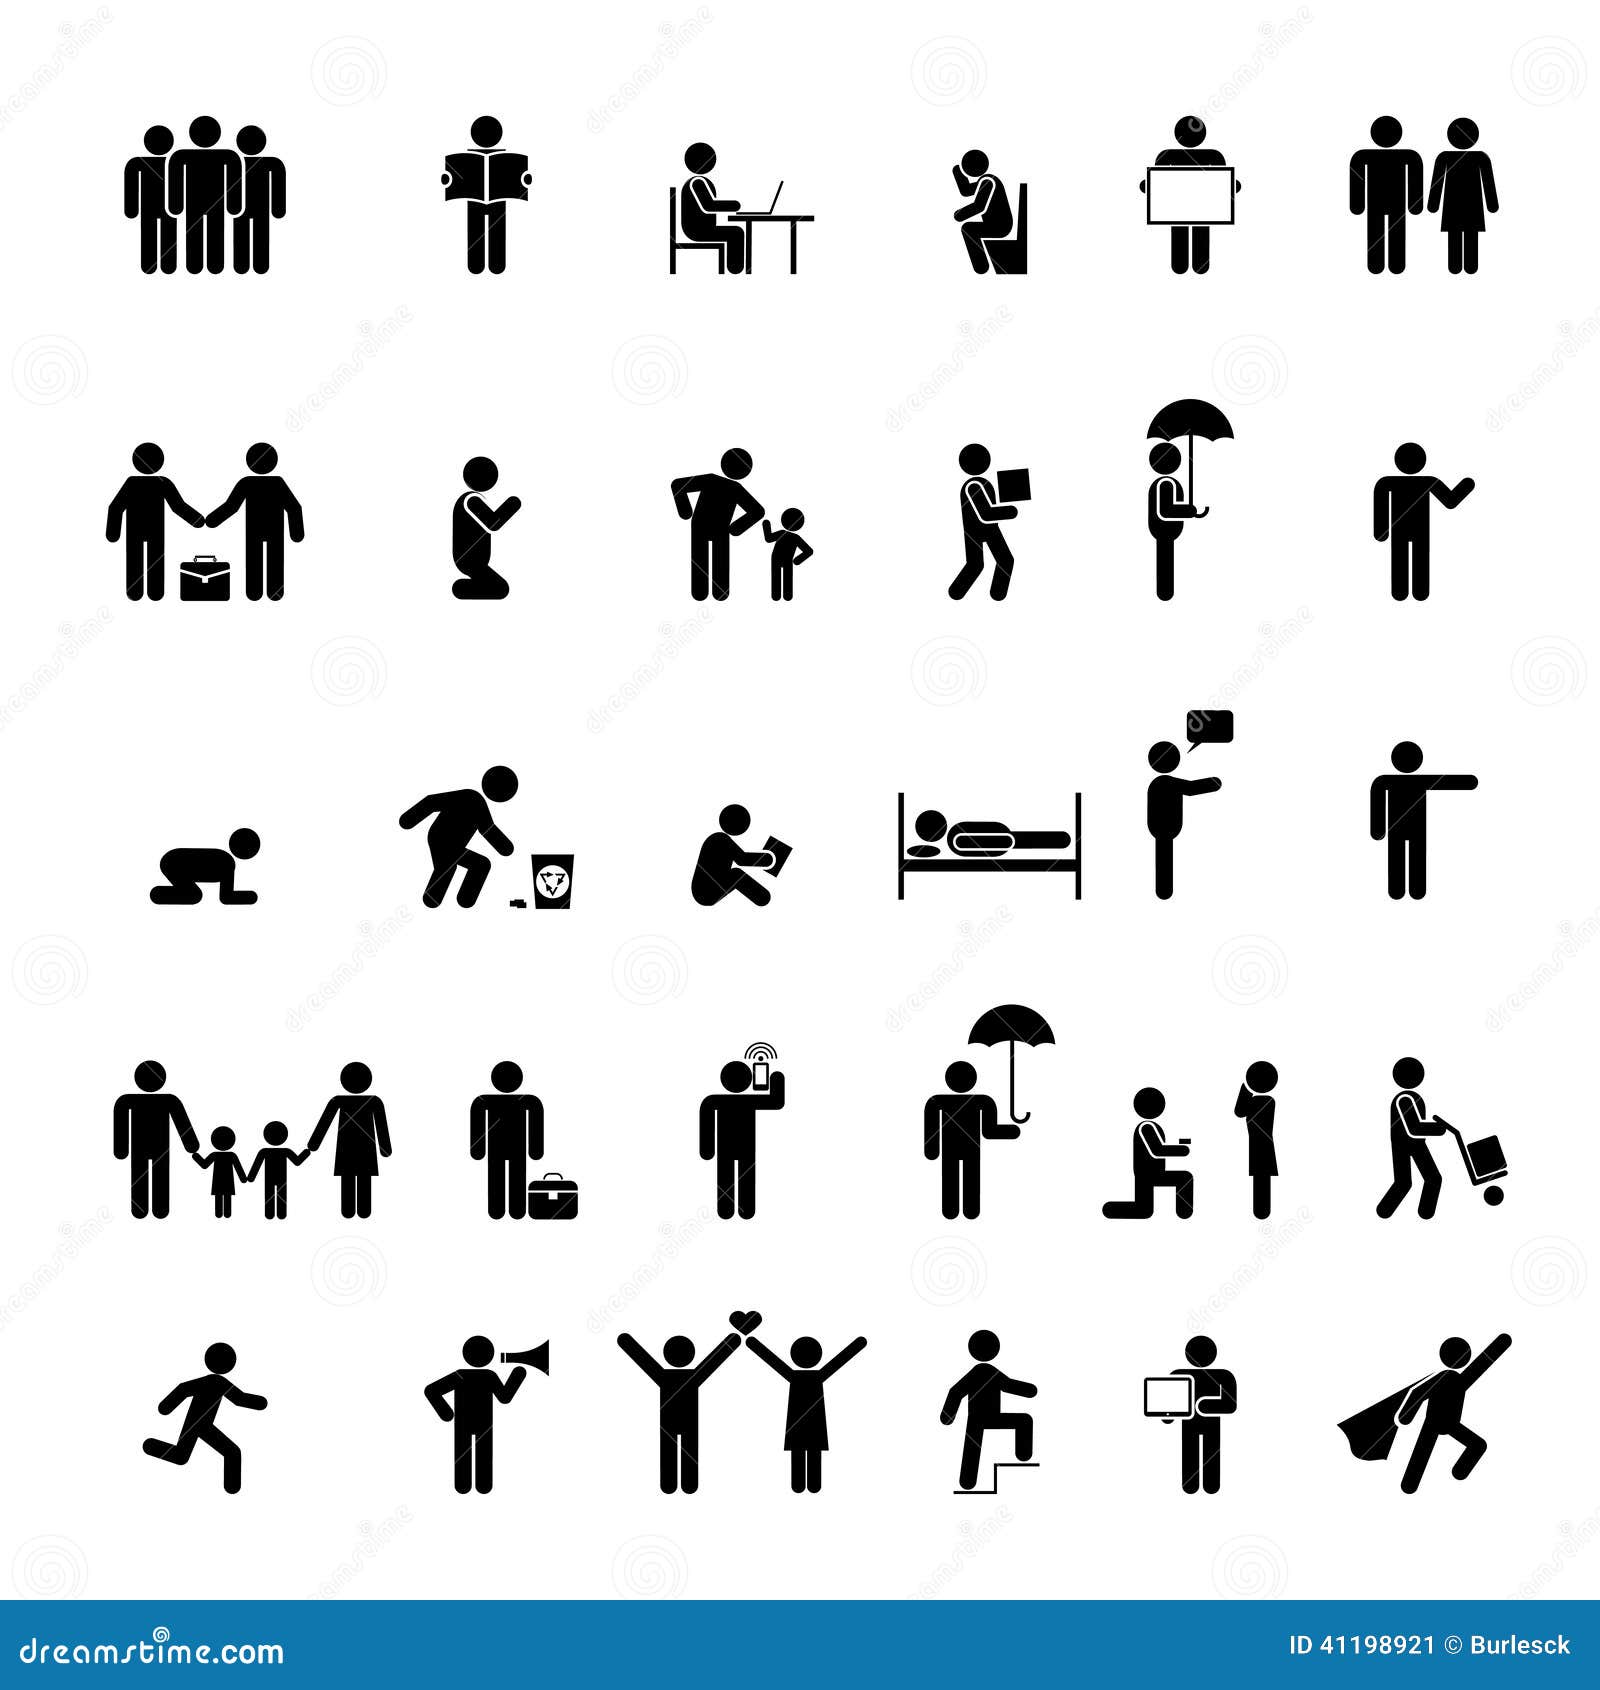 Various Poses Of Man Sleeping On Bed High-Res Vector Graphic - Getty Images